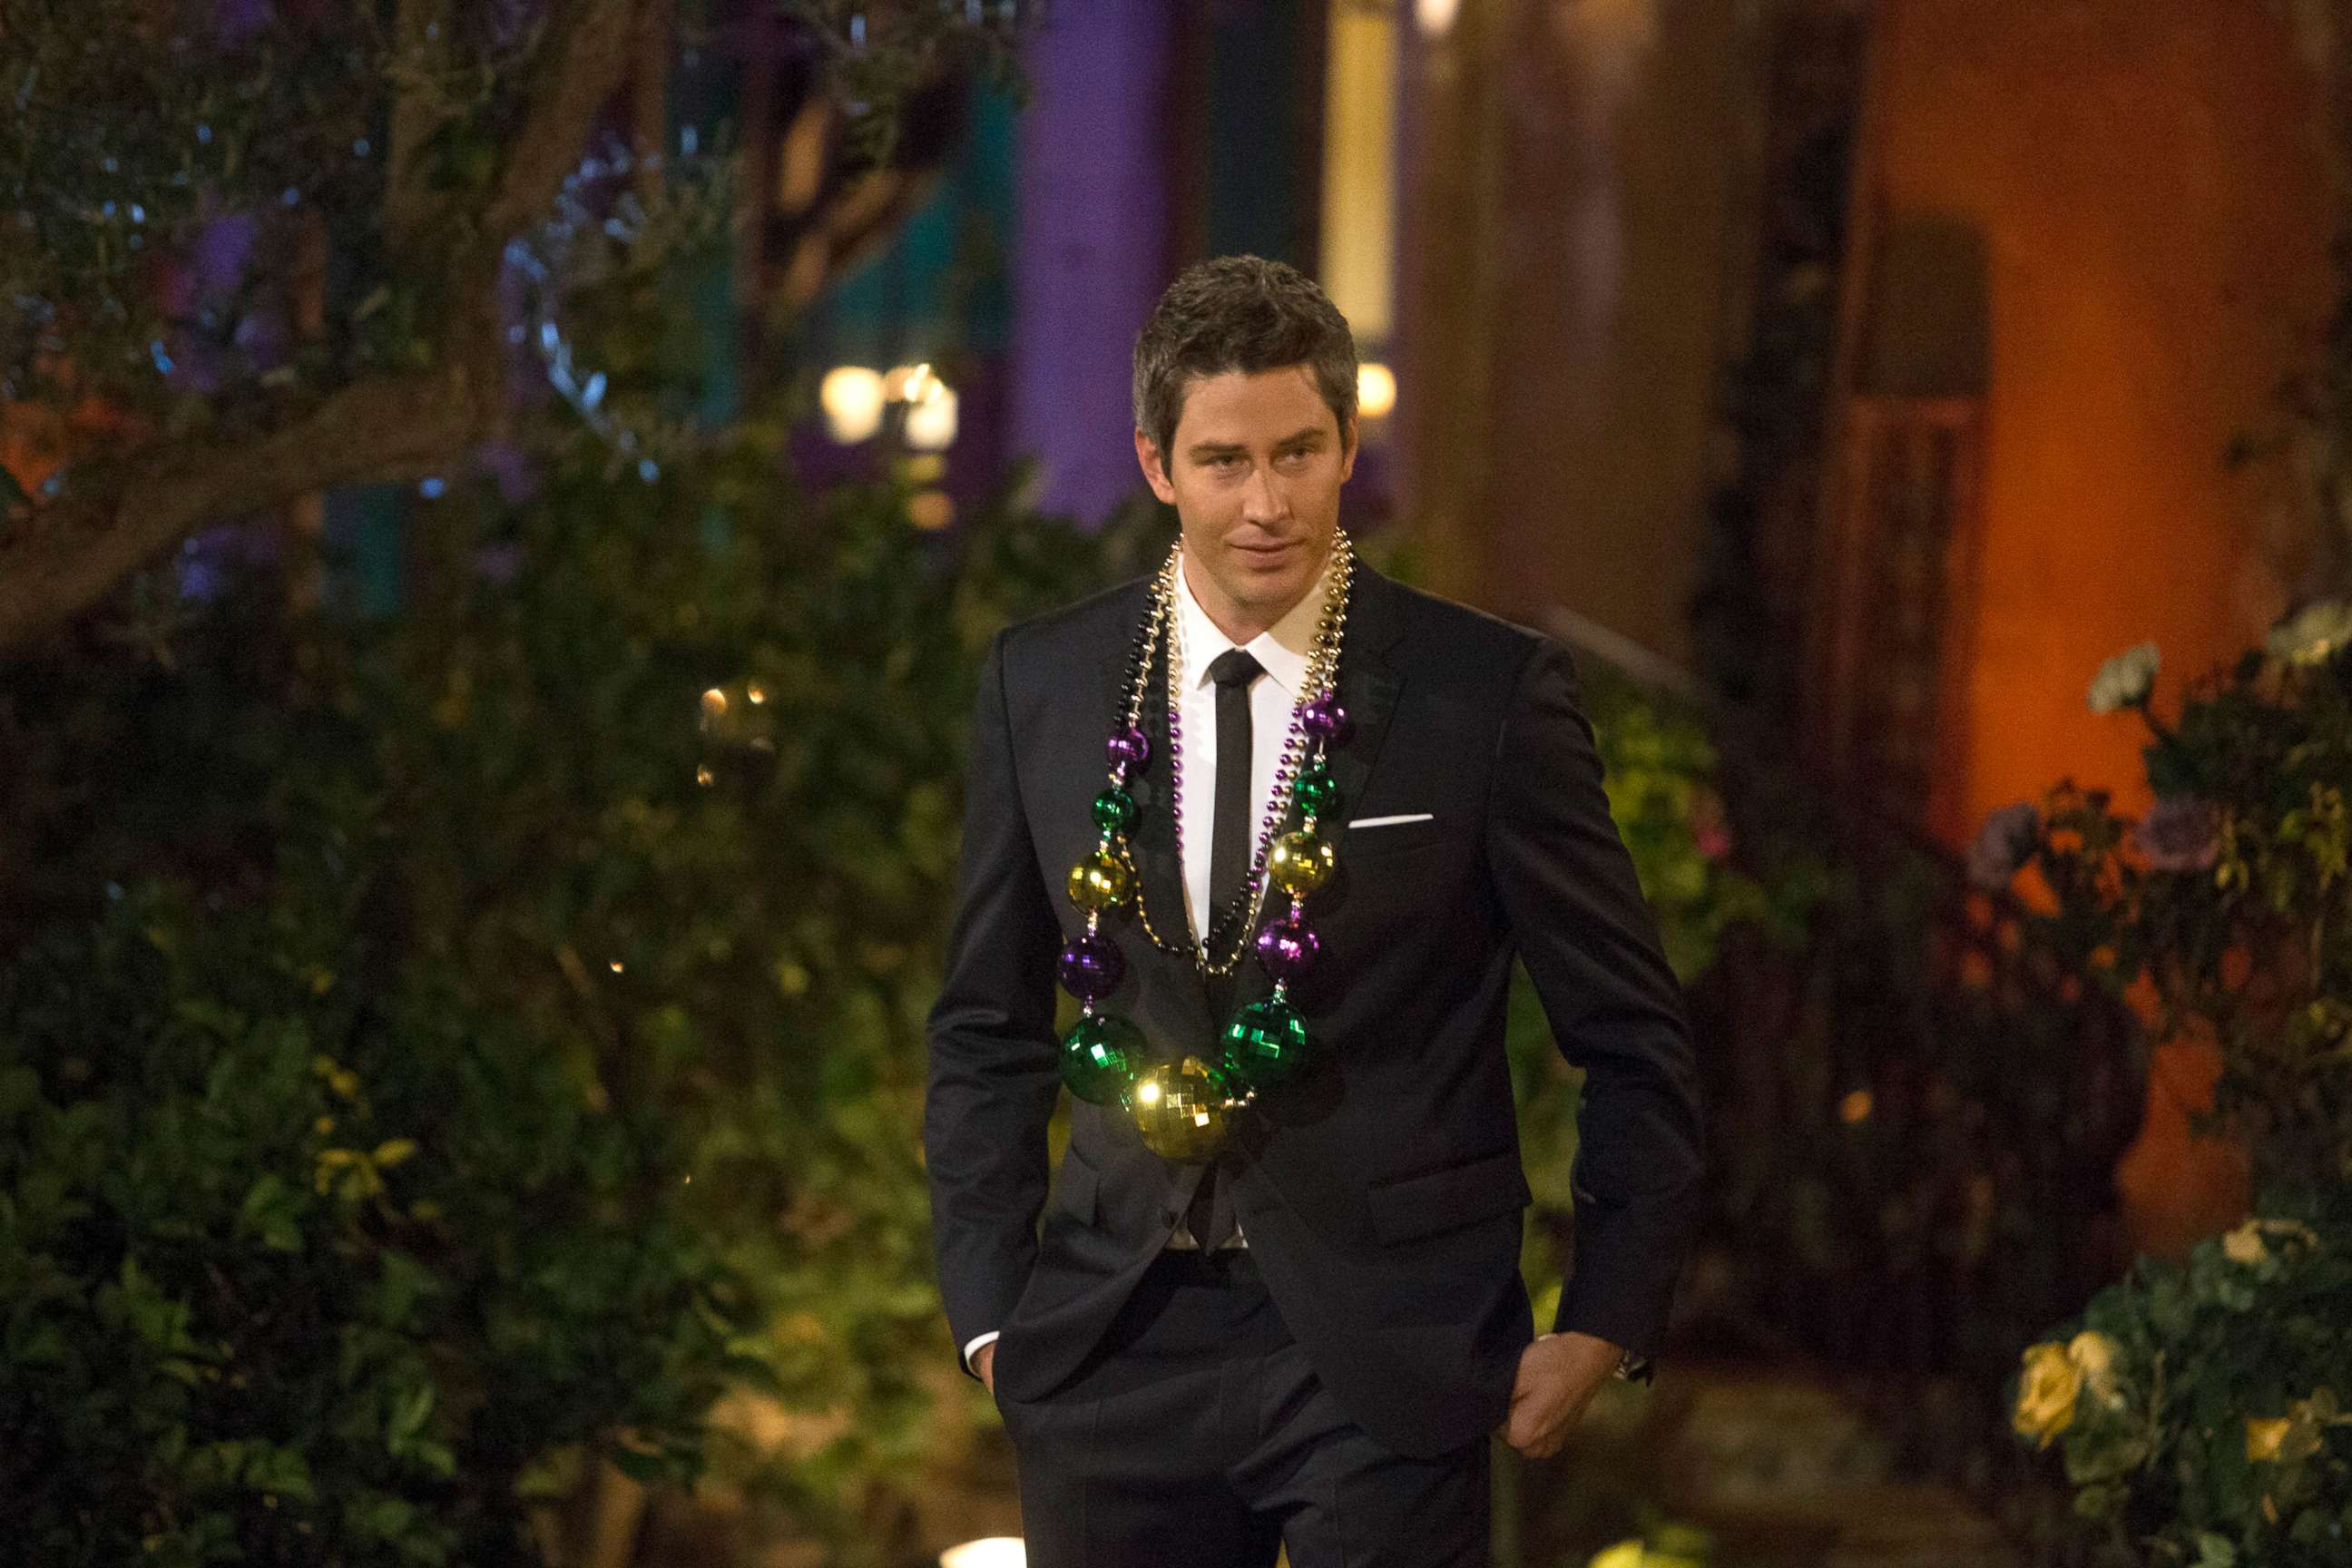 PHOTO: Arie Luyendyk Jr. during the premiere of the 22nd season of The Bachelor which aired Jan. 2, 2018. 